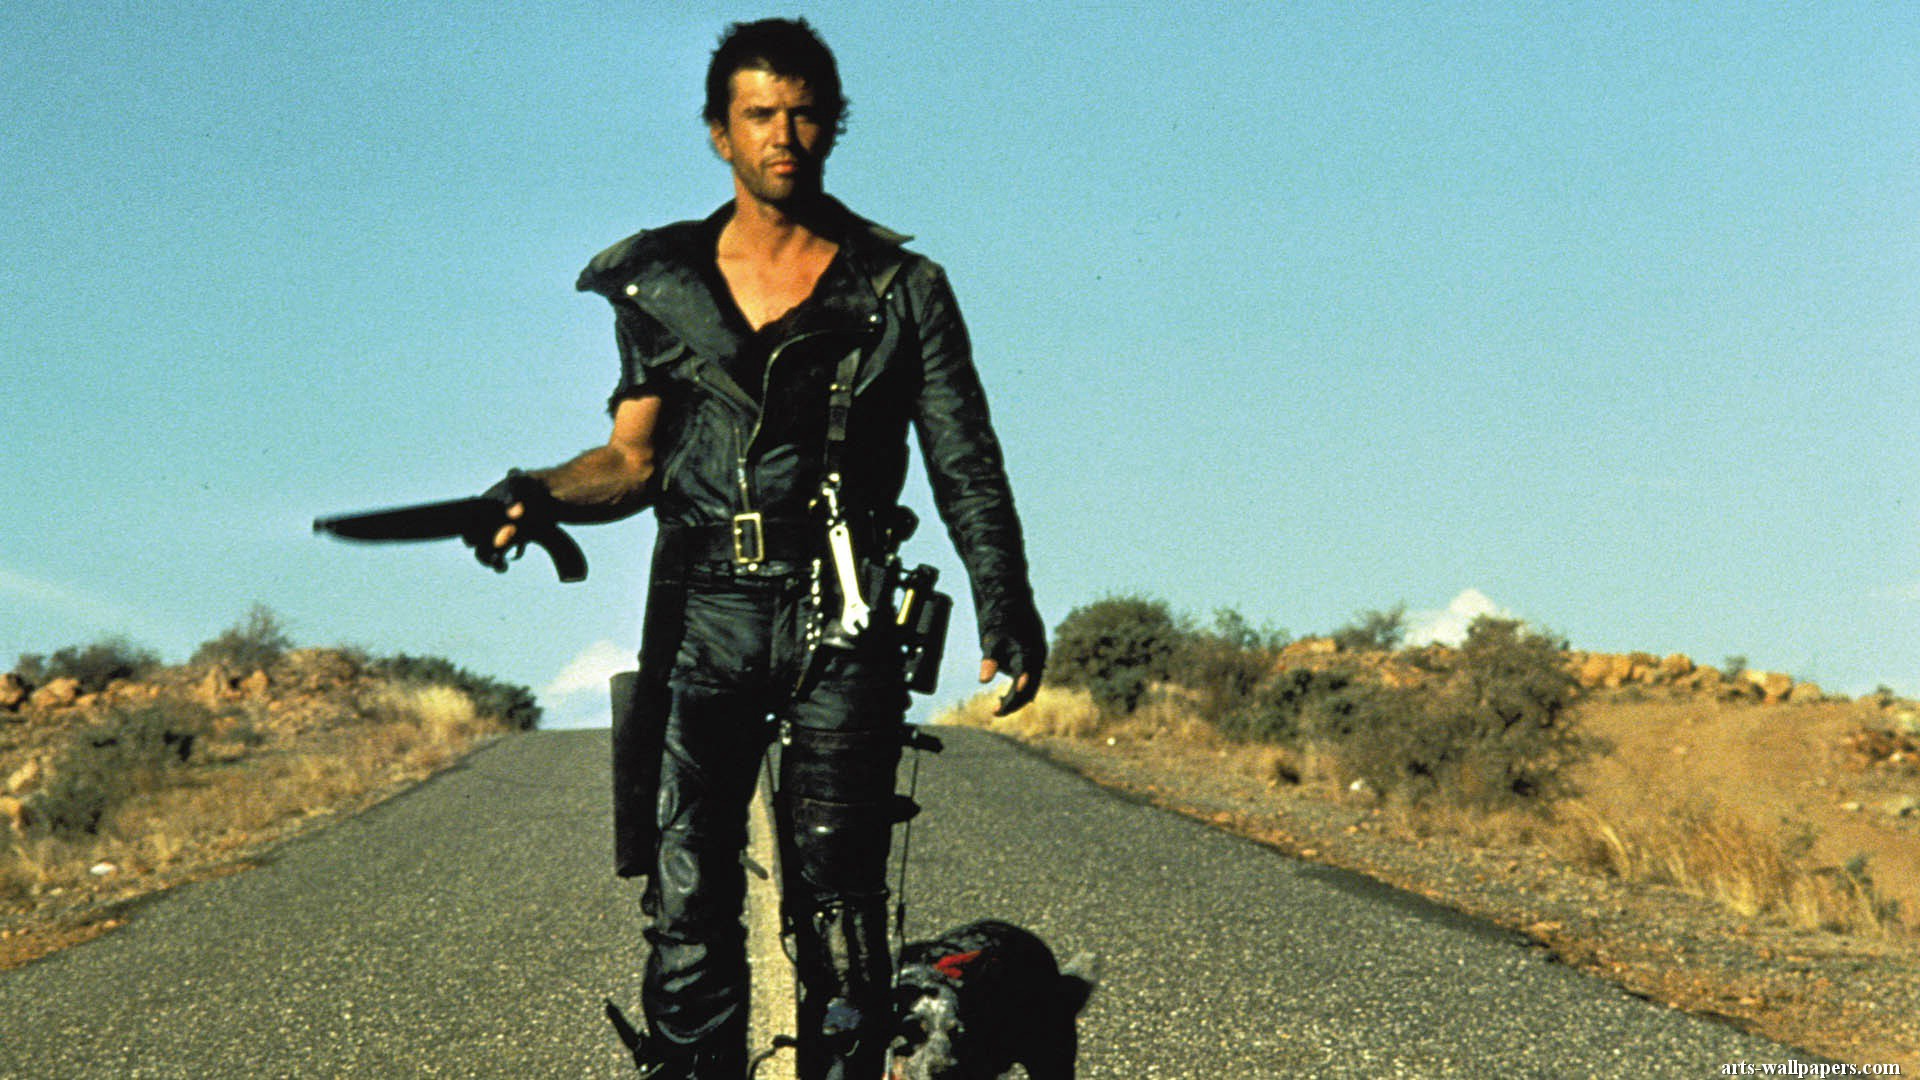 Mad Max Movie HD Wallpaper Widescreen The Road Warrior